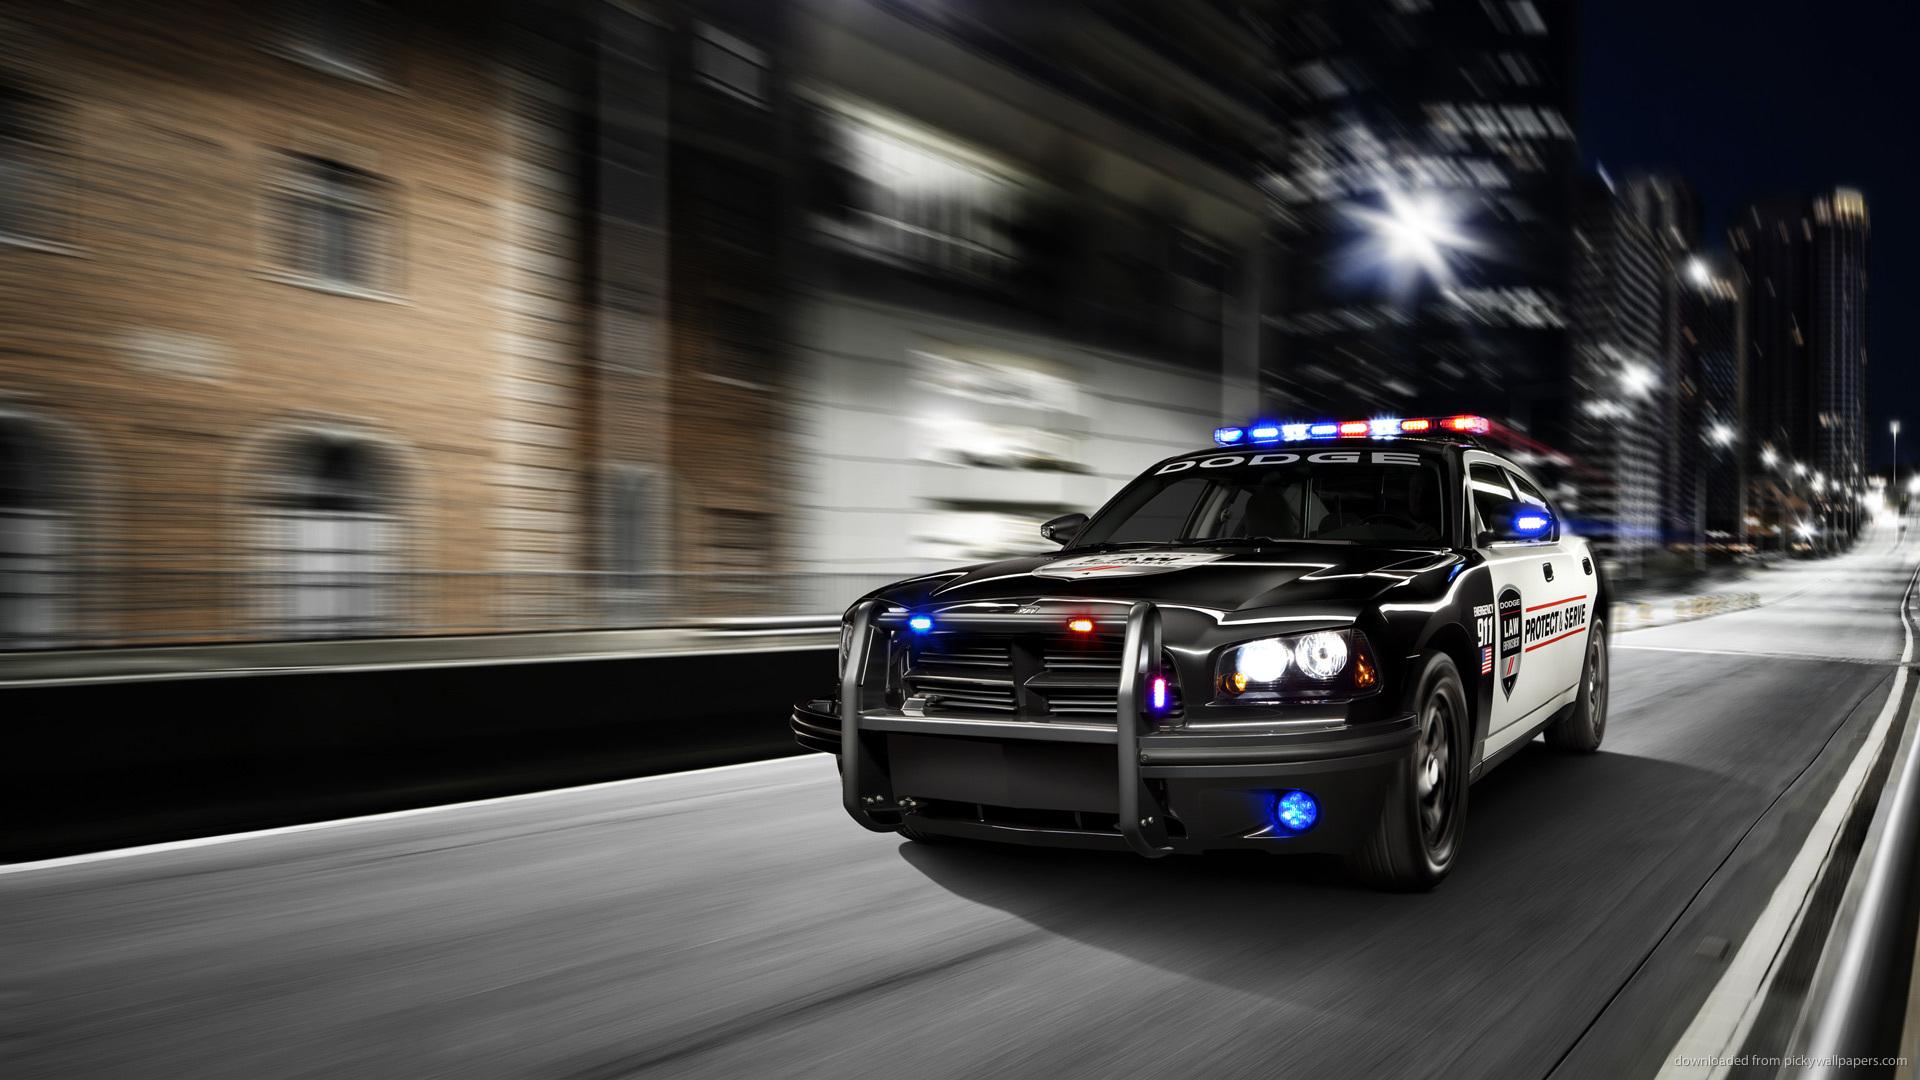 Cool Police Cars Wallpaper